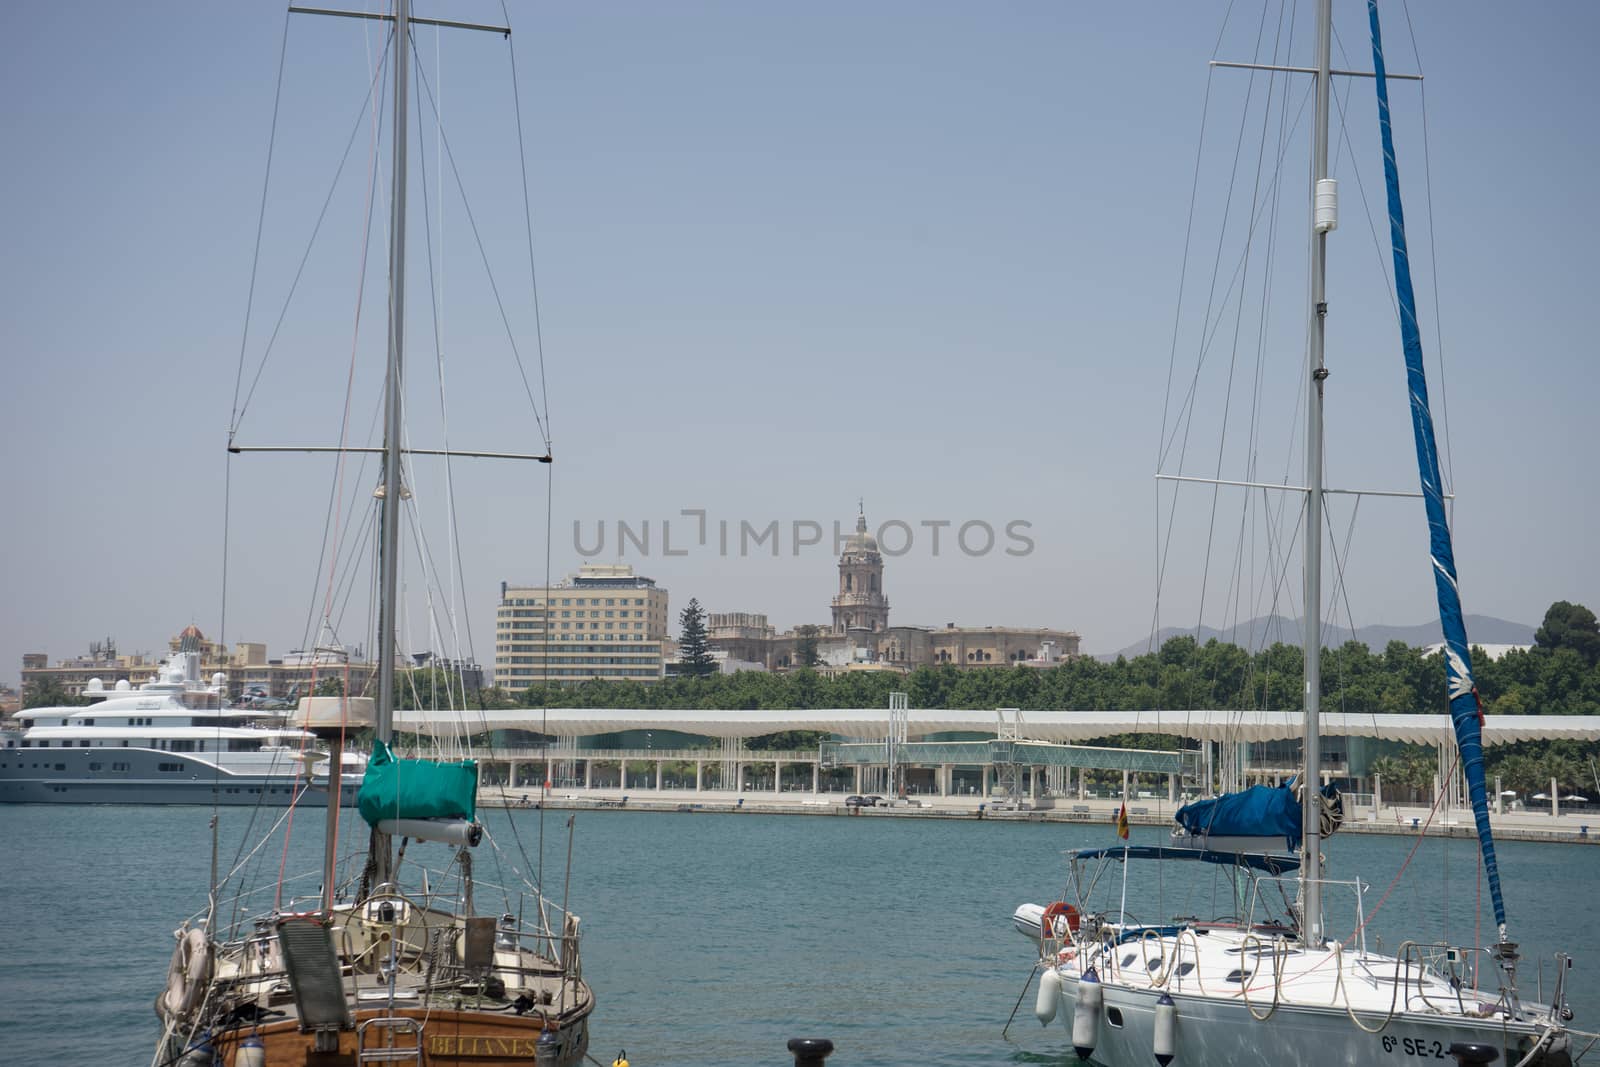 Boats with their sails down docking at the harbour in Malaga, Sp by ramana16